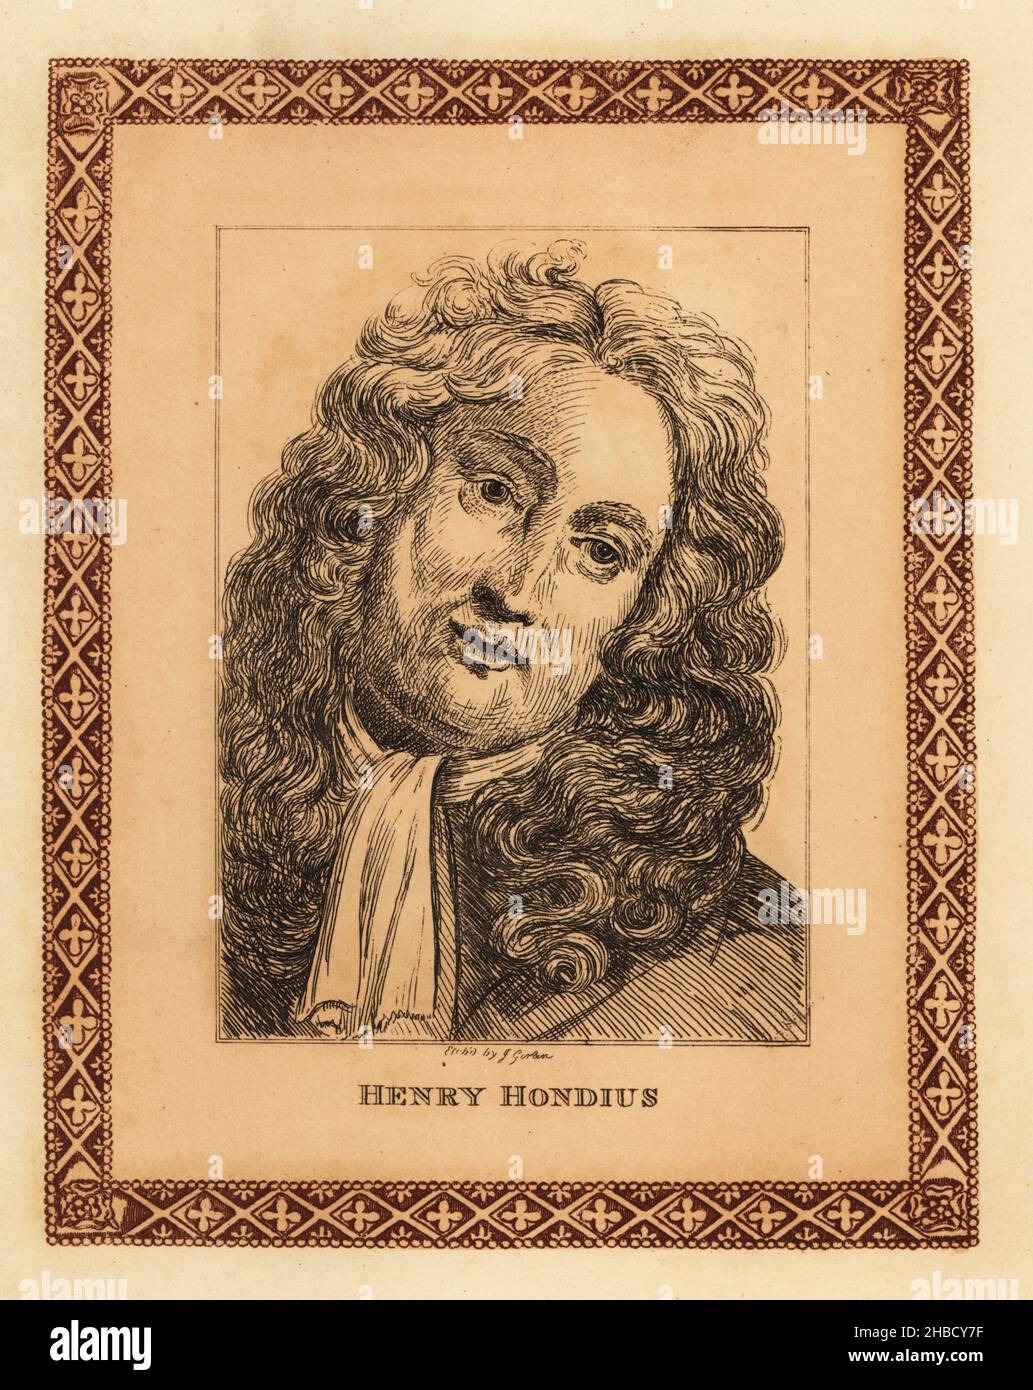 Portrait of Hendrik Hondius, 1573-1650, Flemish-born engraver, printmaker, draughtsman and publisher who settled in the Dutch Republic. Henry Hondius. Tinted etching within a decorative border by John Girtin from John Girtin’s Seventy-Five Portraits of Celebrated Painters from Authentic Originals, J. M’Creery, London, 1817. Stock Photo